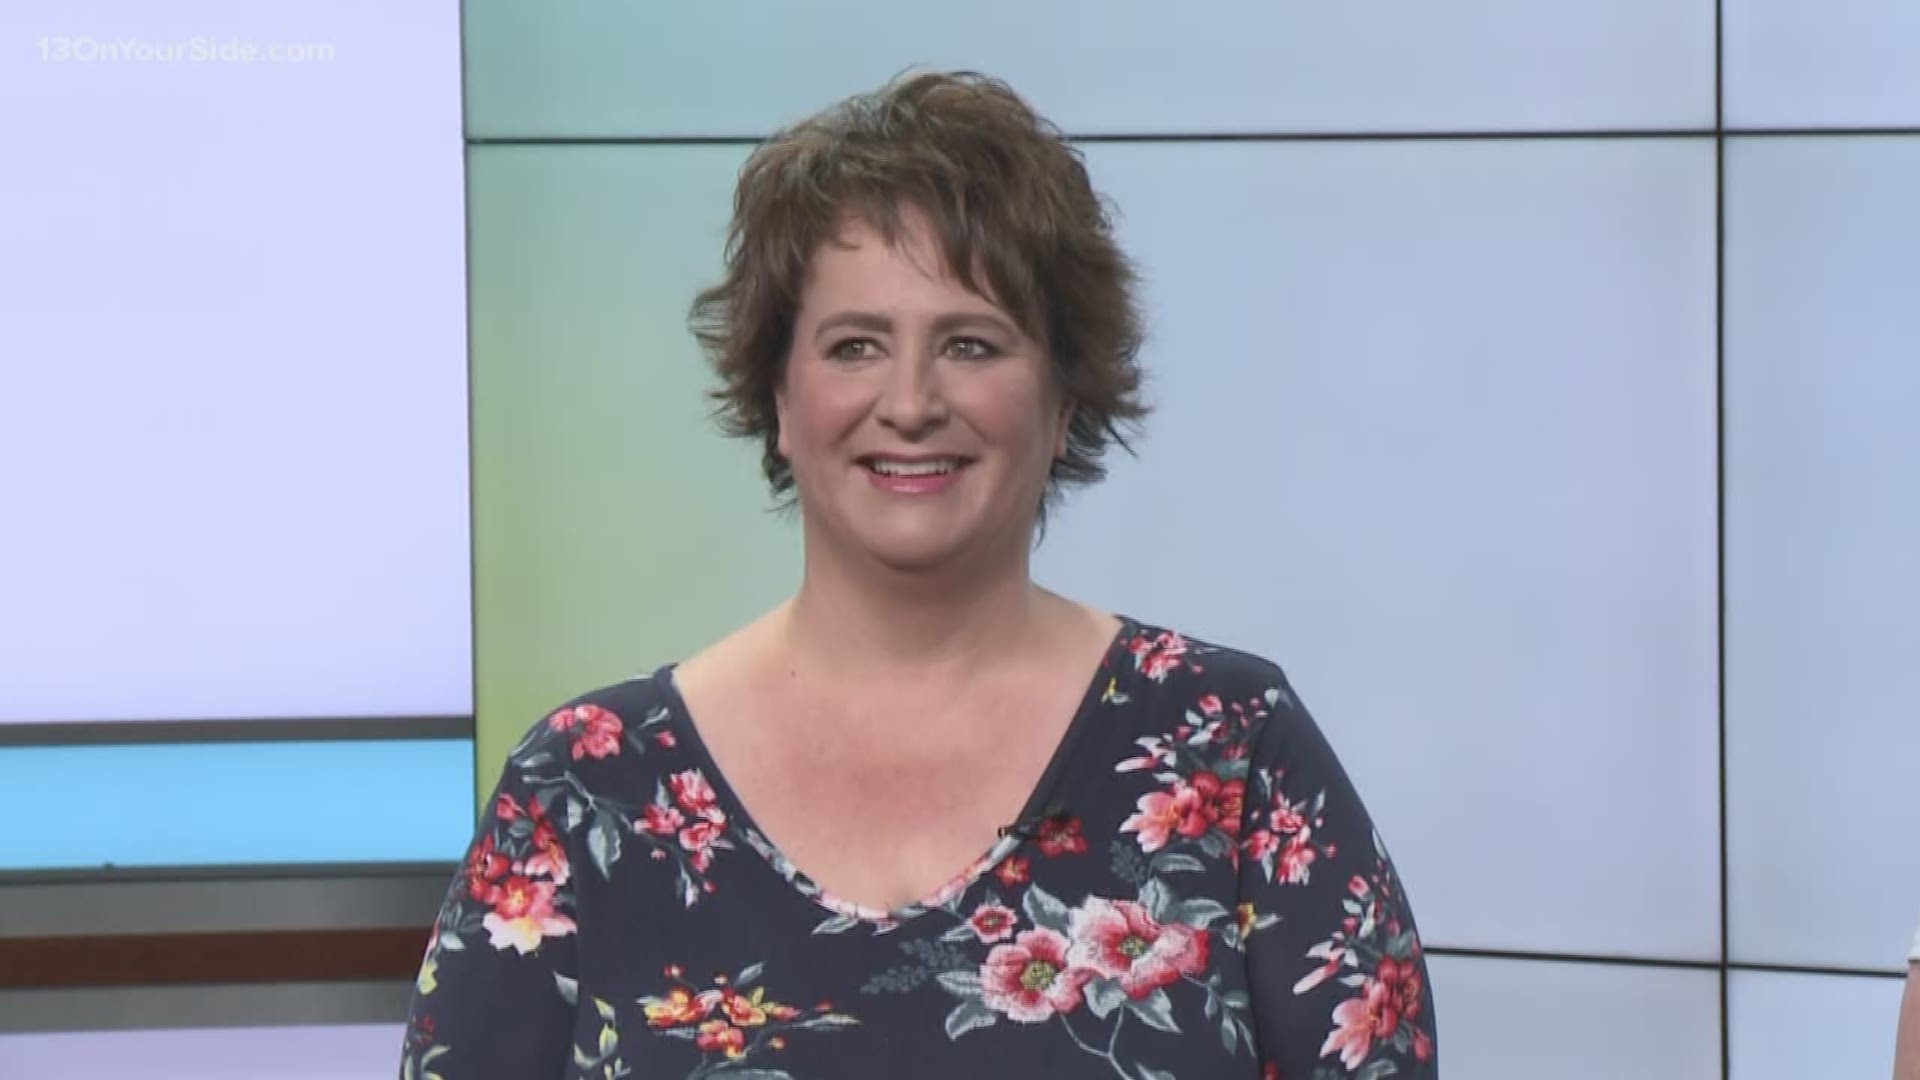 In this edition of Makeover Monday, the My West Michigan team brought on Kris Foote and gave her a fresh, new look with the help of Matt Flora of Matt Flora Hair Studio. It highlights her cheekbones, her eyes, and her chin.